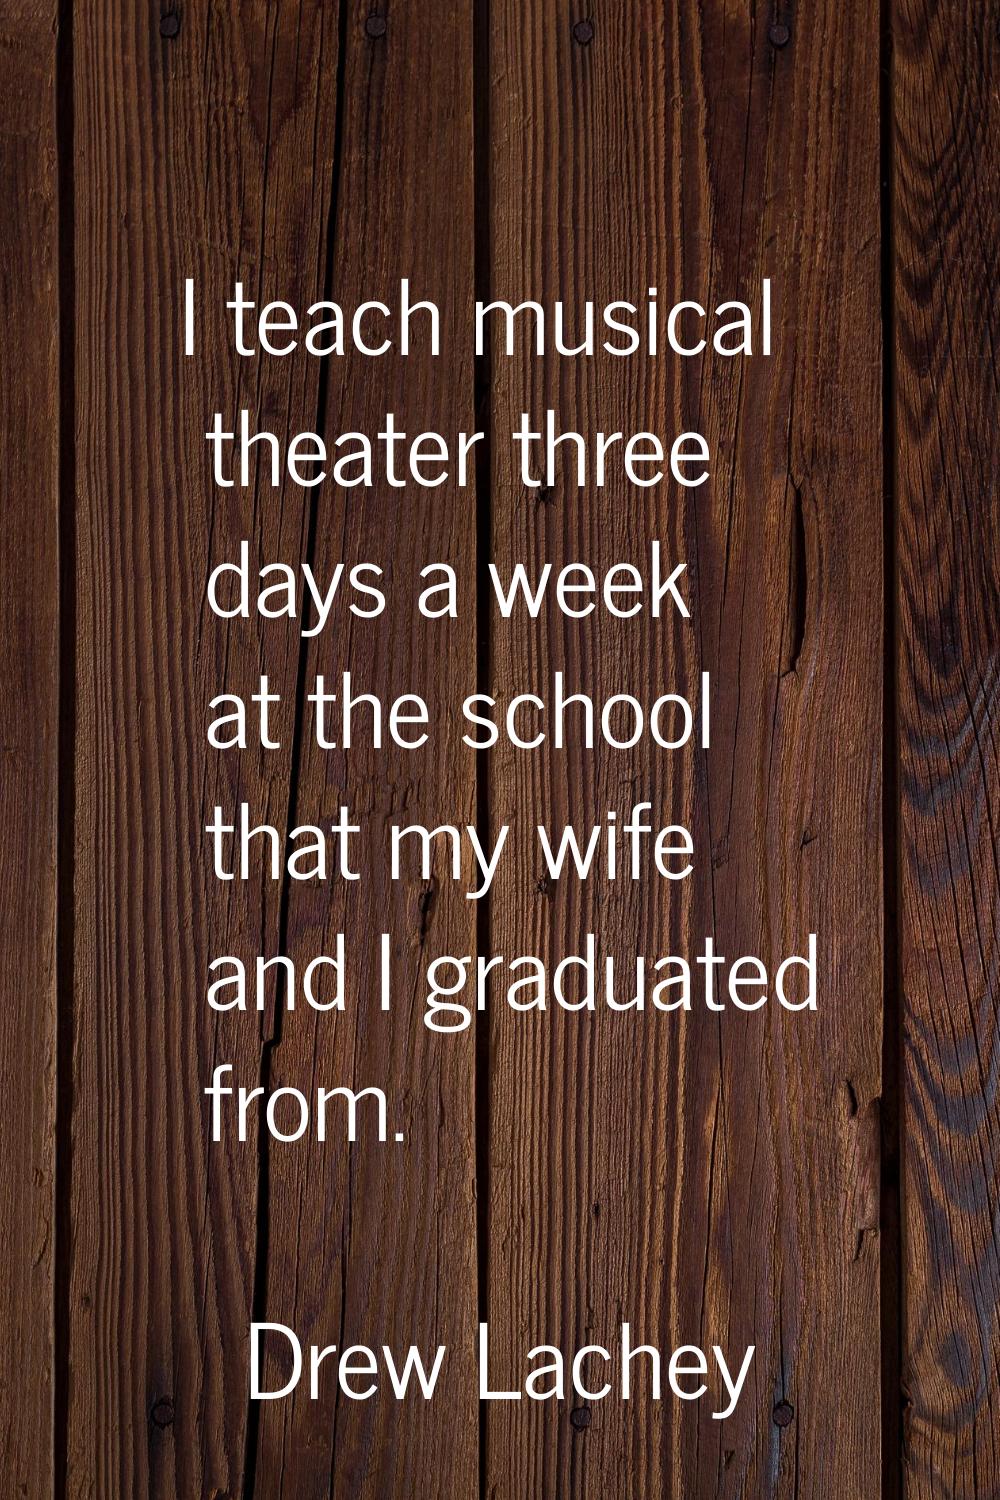 I teach musical theater three days a week at the school that my wife and I graduated from.